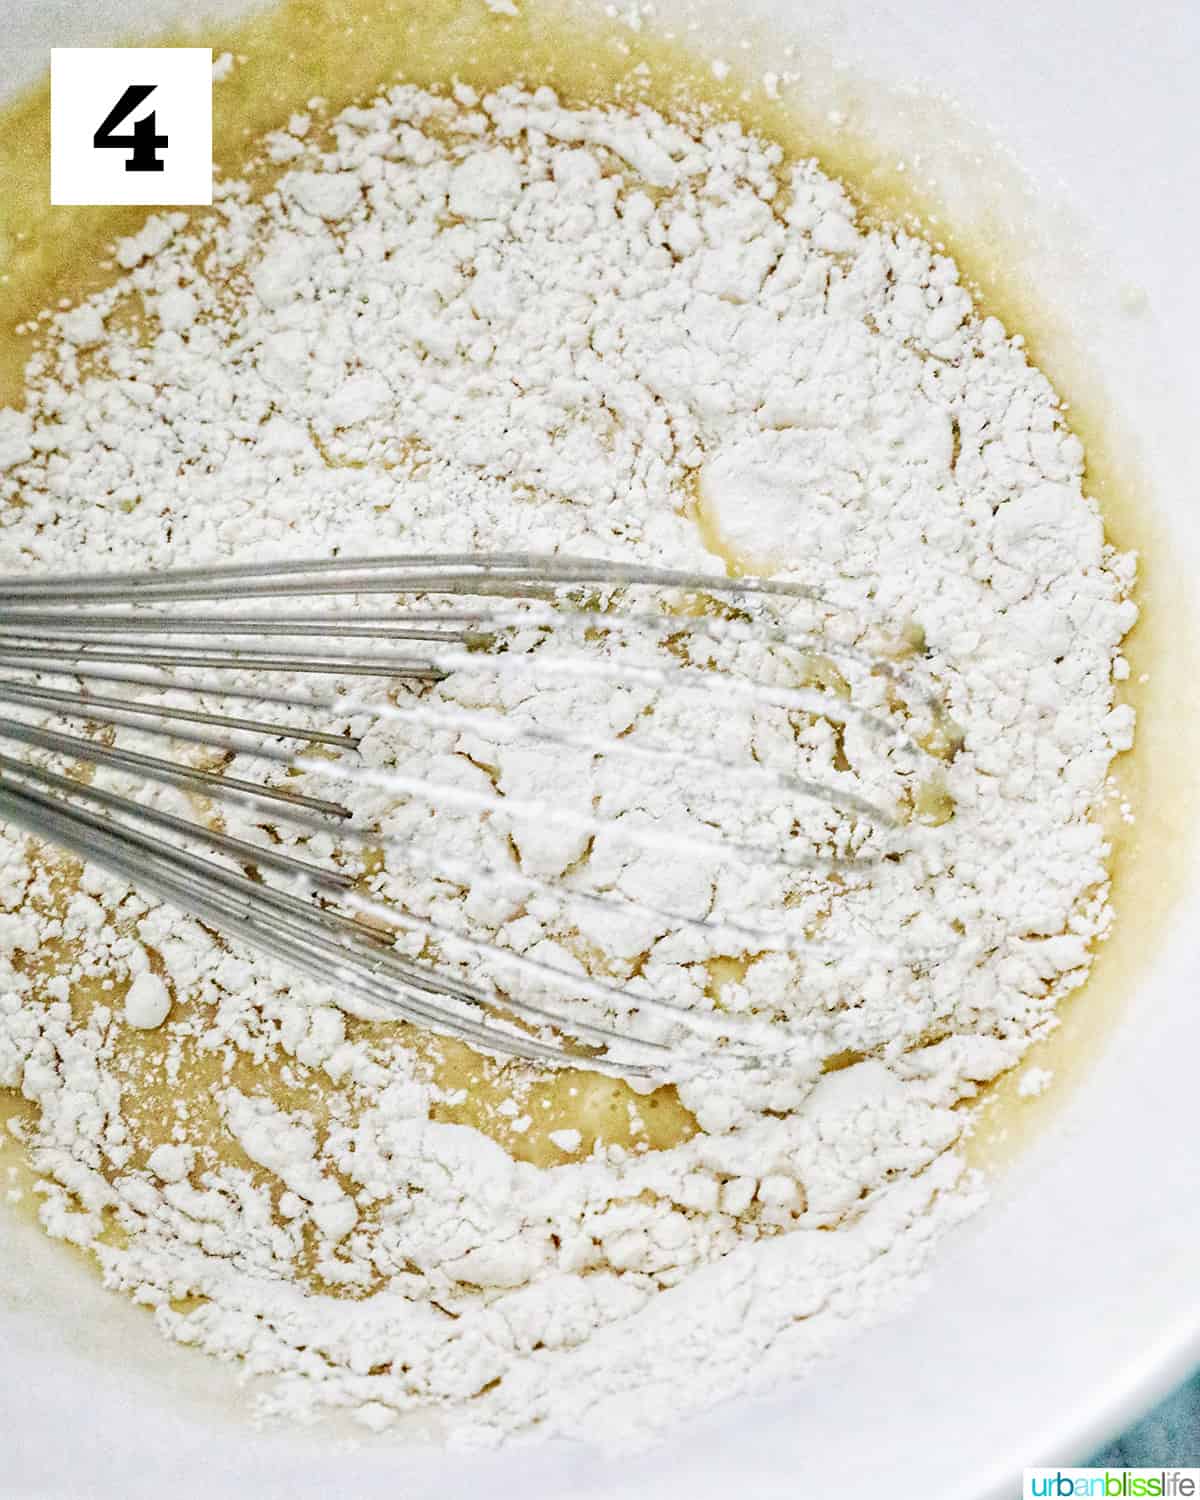 whisking in flour into wet ingredients in a white bowl to make spanish bread.